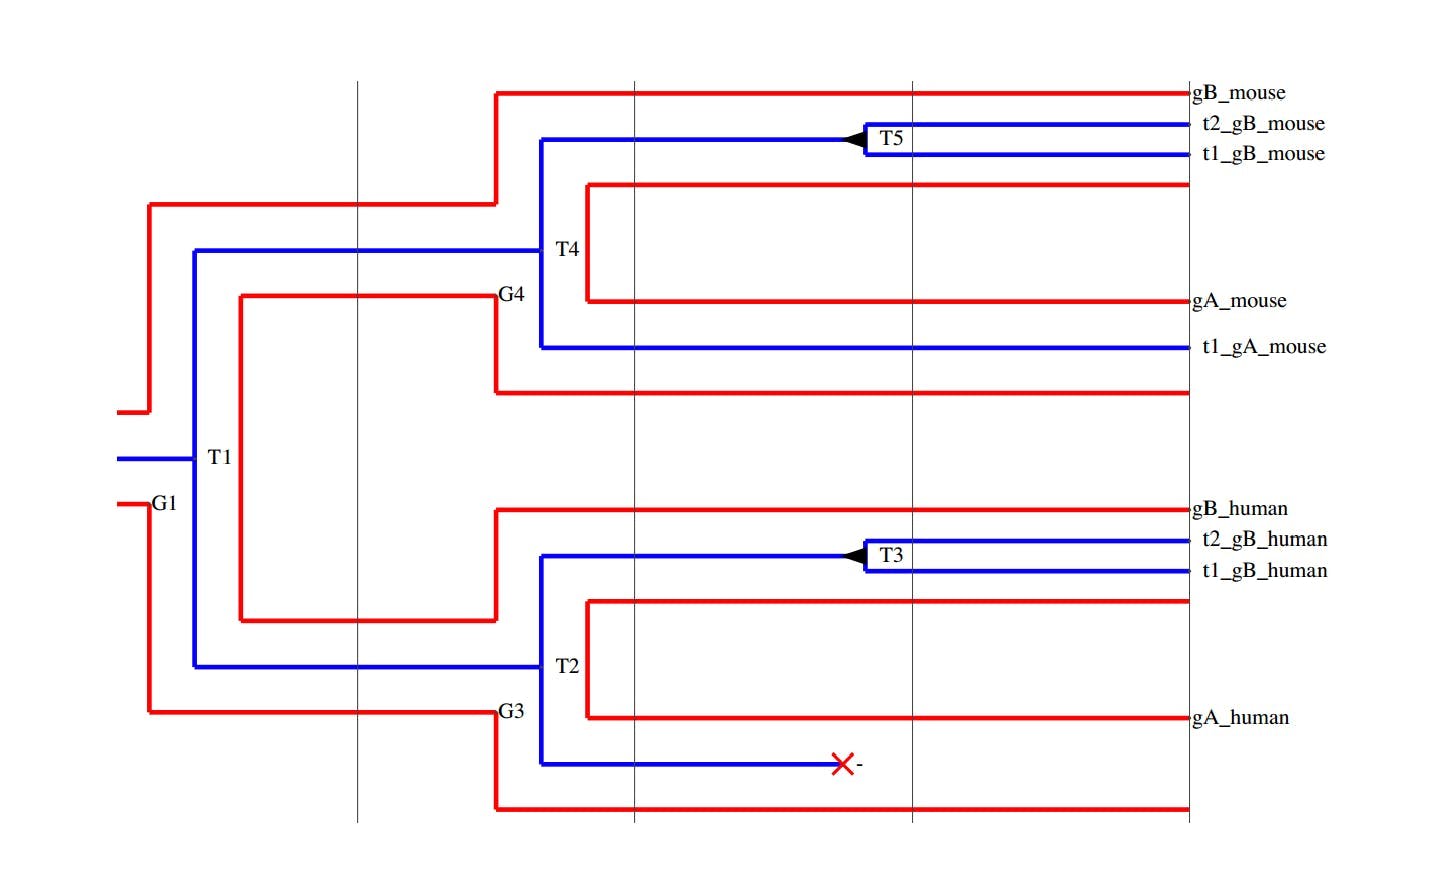 Phylogenetic Tree Reconciliation